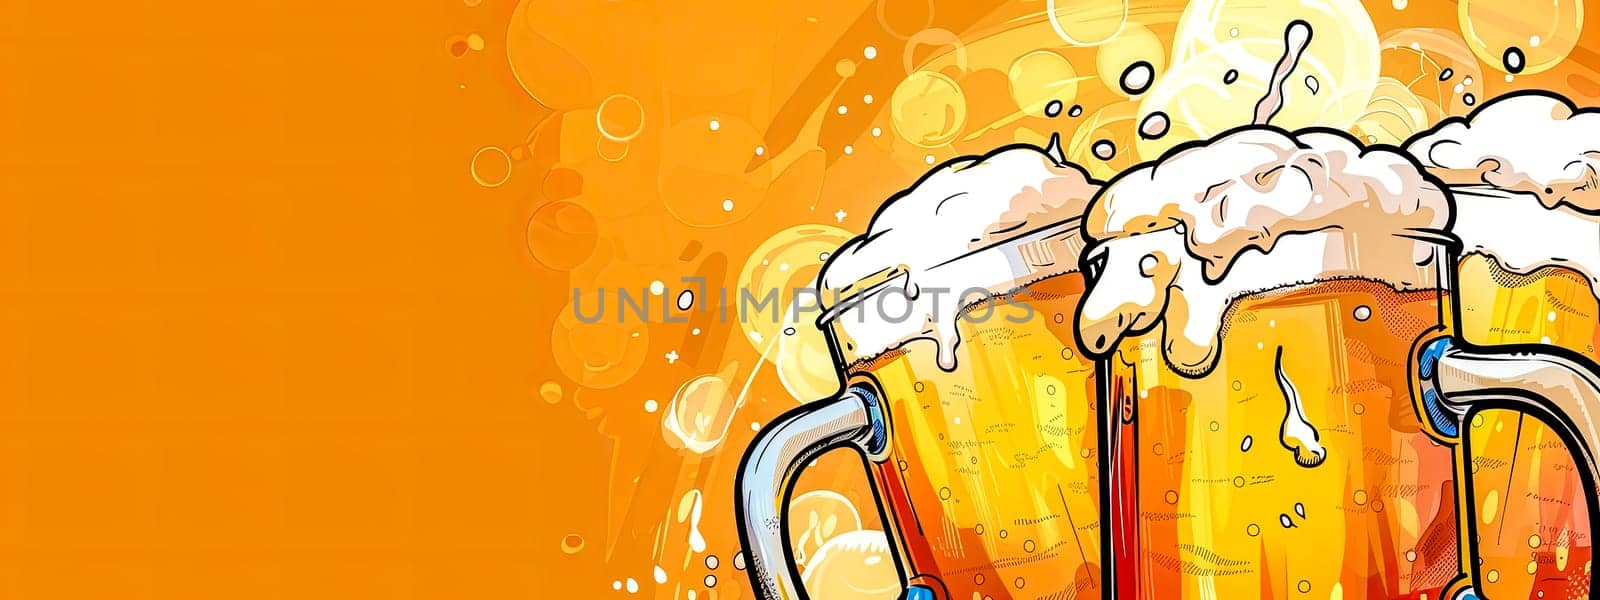 Artistic illustration of clinking beer mugs with a lively orange background